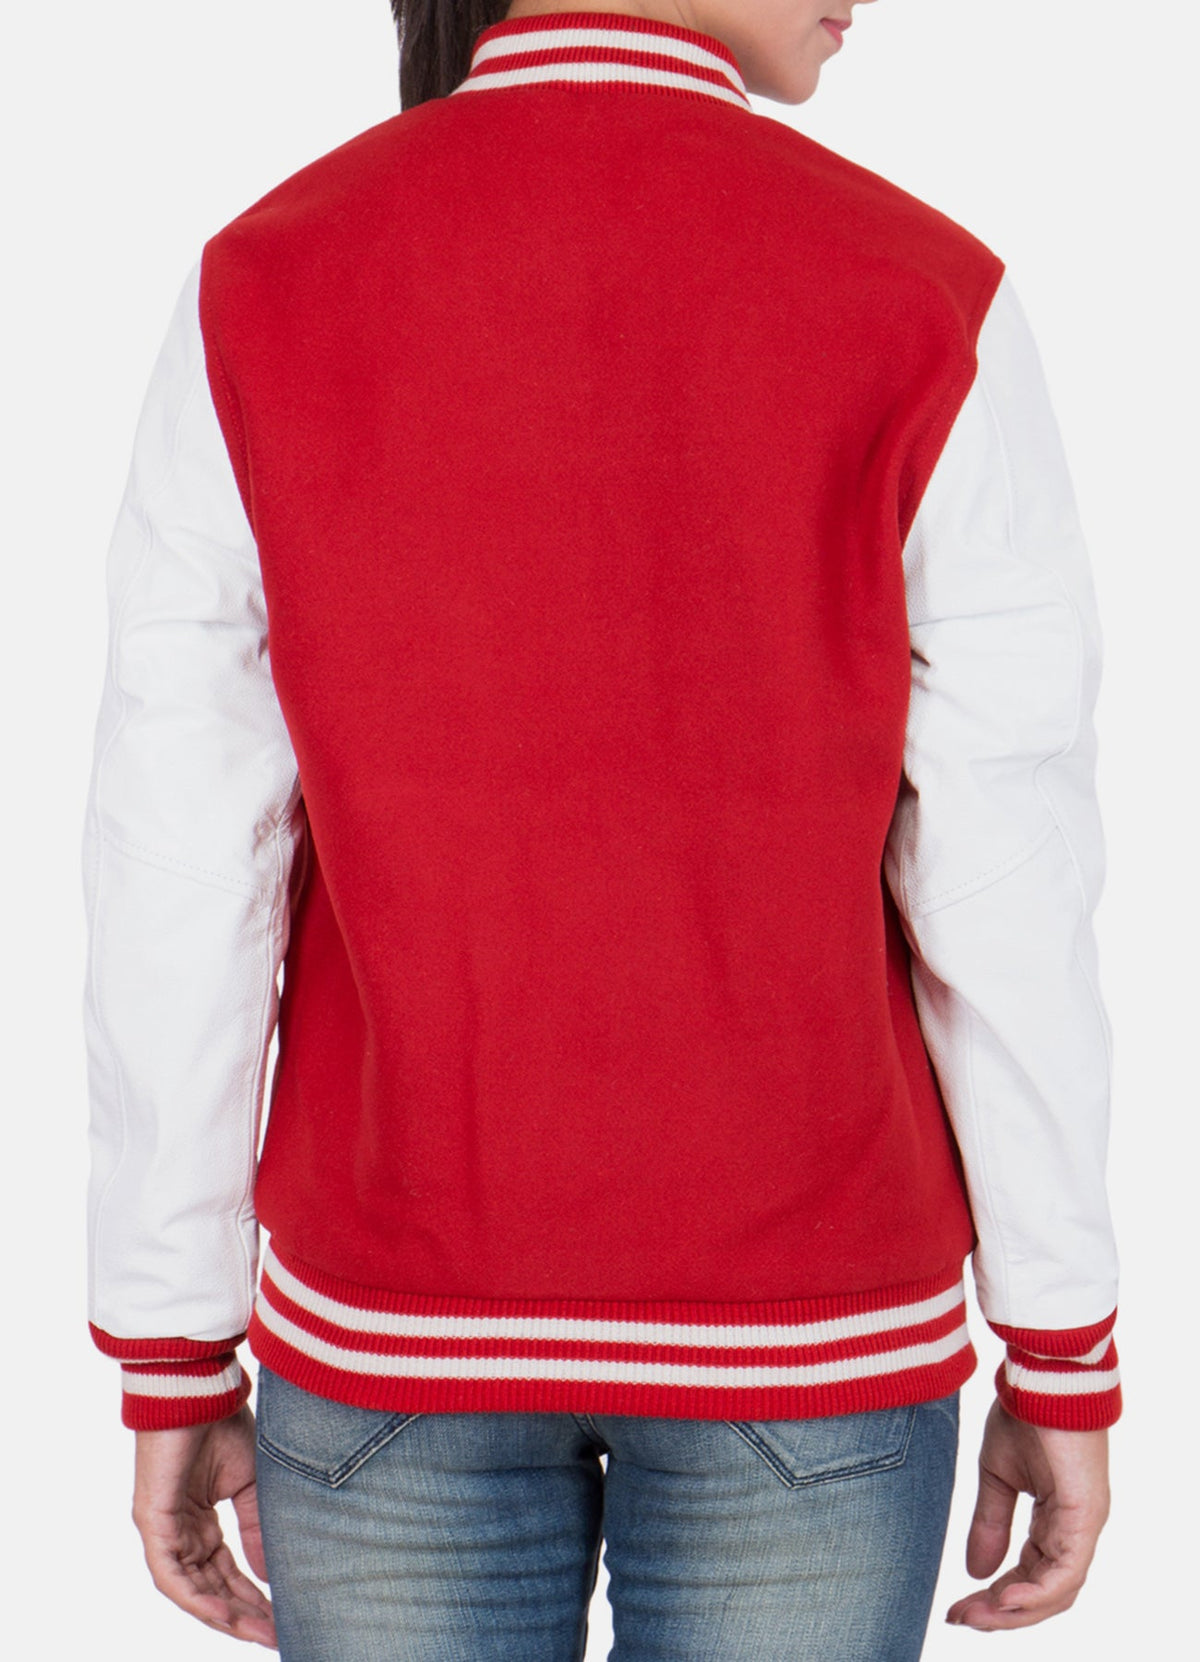 Womens Classic Red and White Varsity Jacket